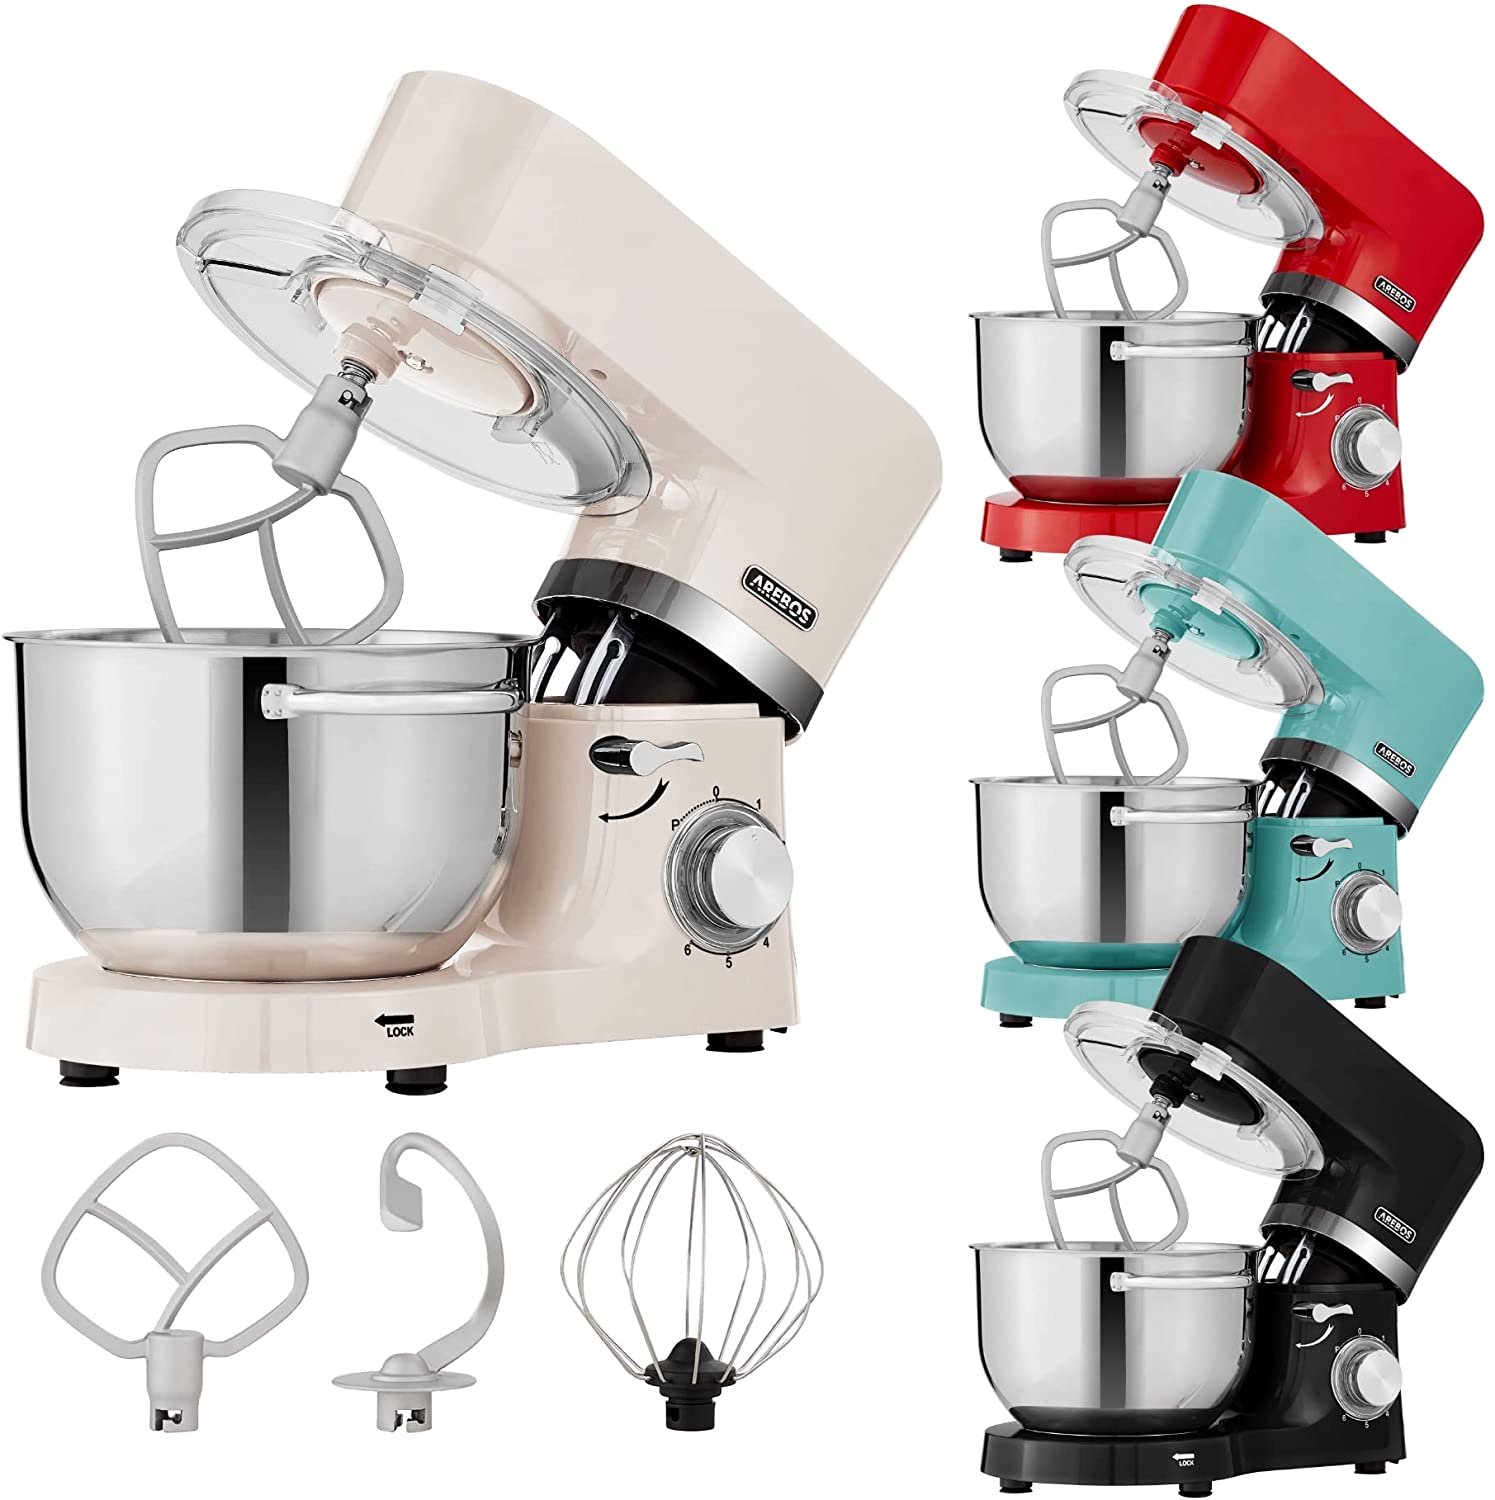 Arebos Food Processor 1500 W Cream Kneading Machine with 2 x Stainless Steel Mixing Bowls 4.5 & 5.5 L Low Noise Kitchen Mixer with Mixing Hook, Dough Hook, Whisk and Splash Guard 6 Speeds